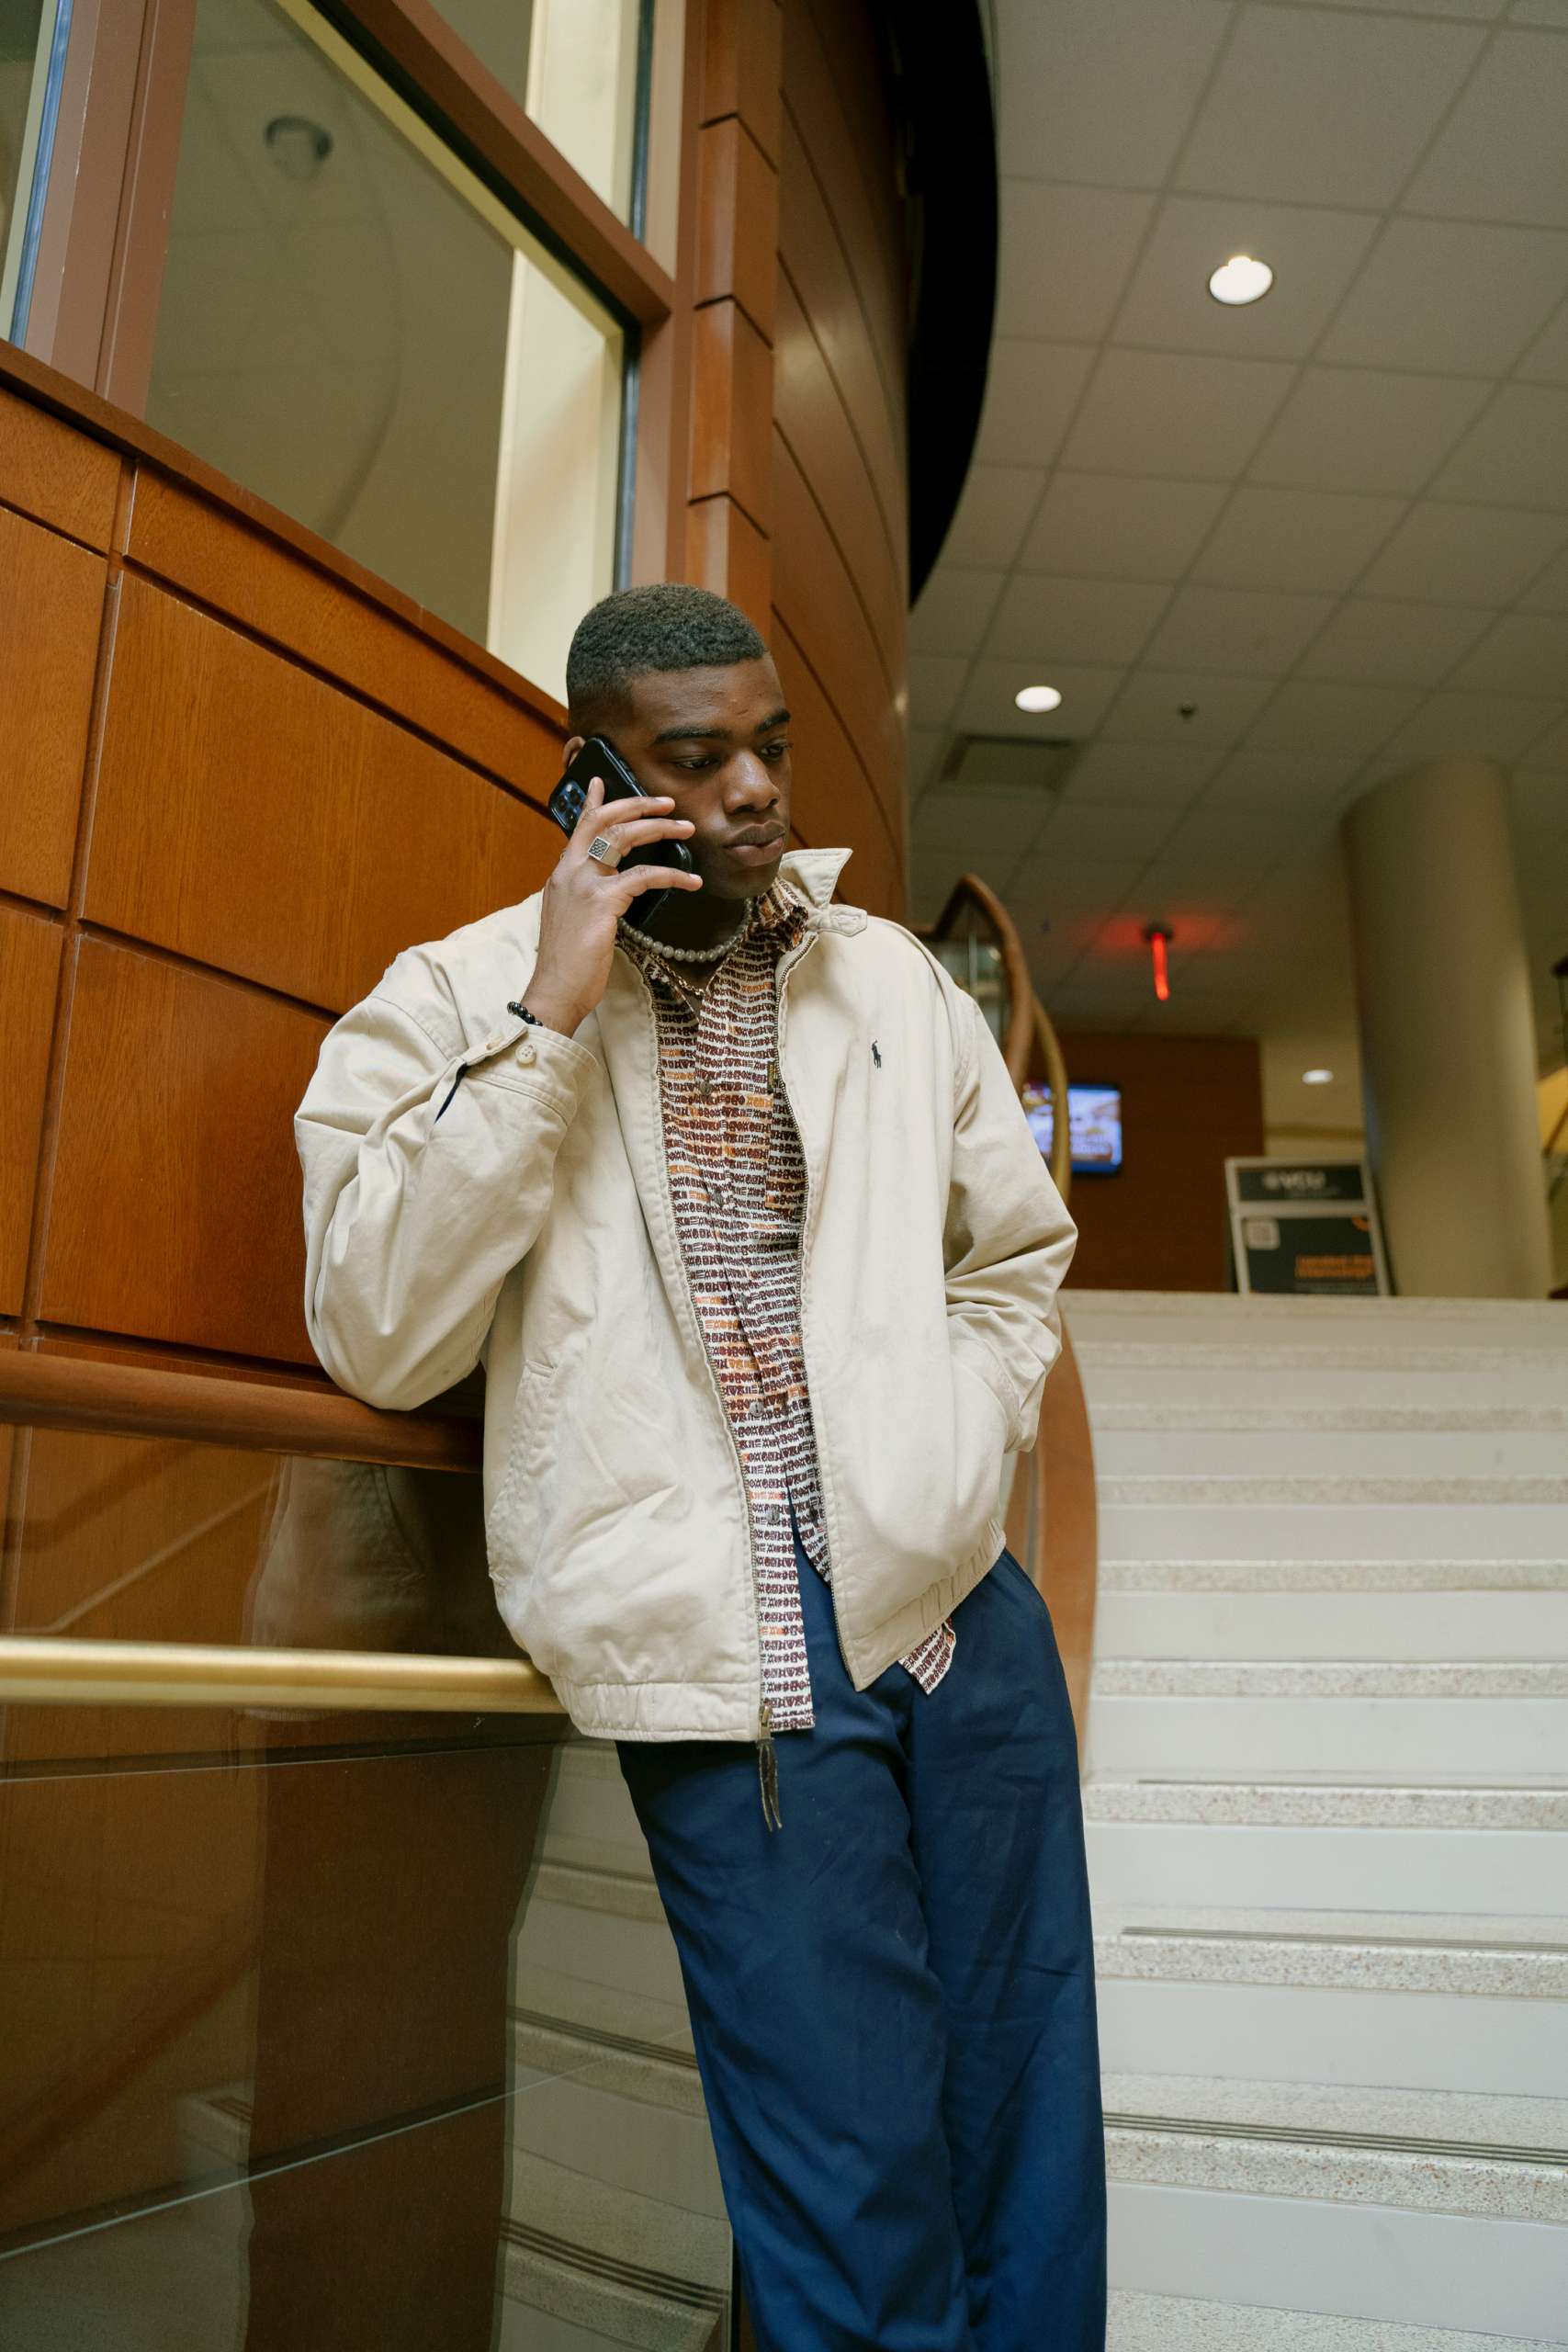 Young black man stands in stairwell on the phone.